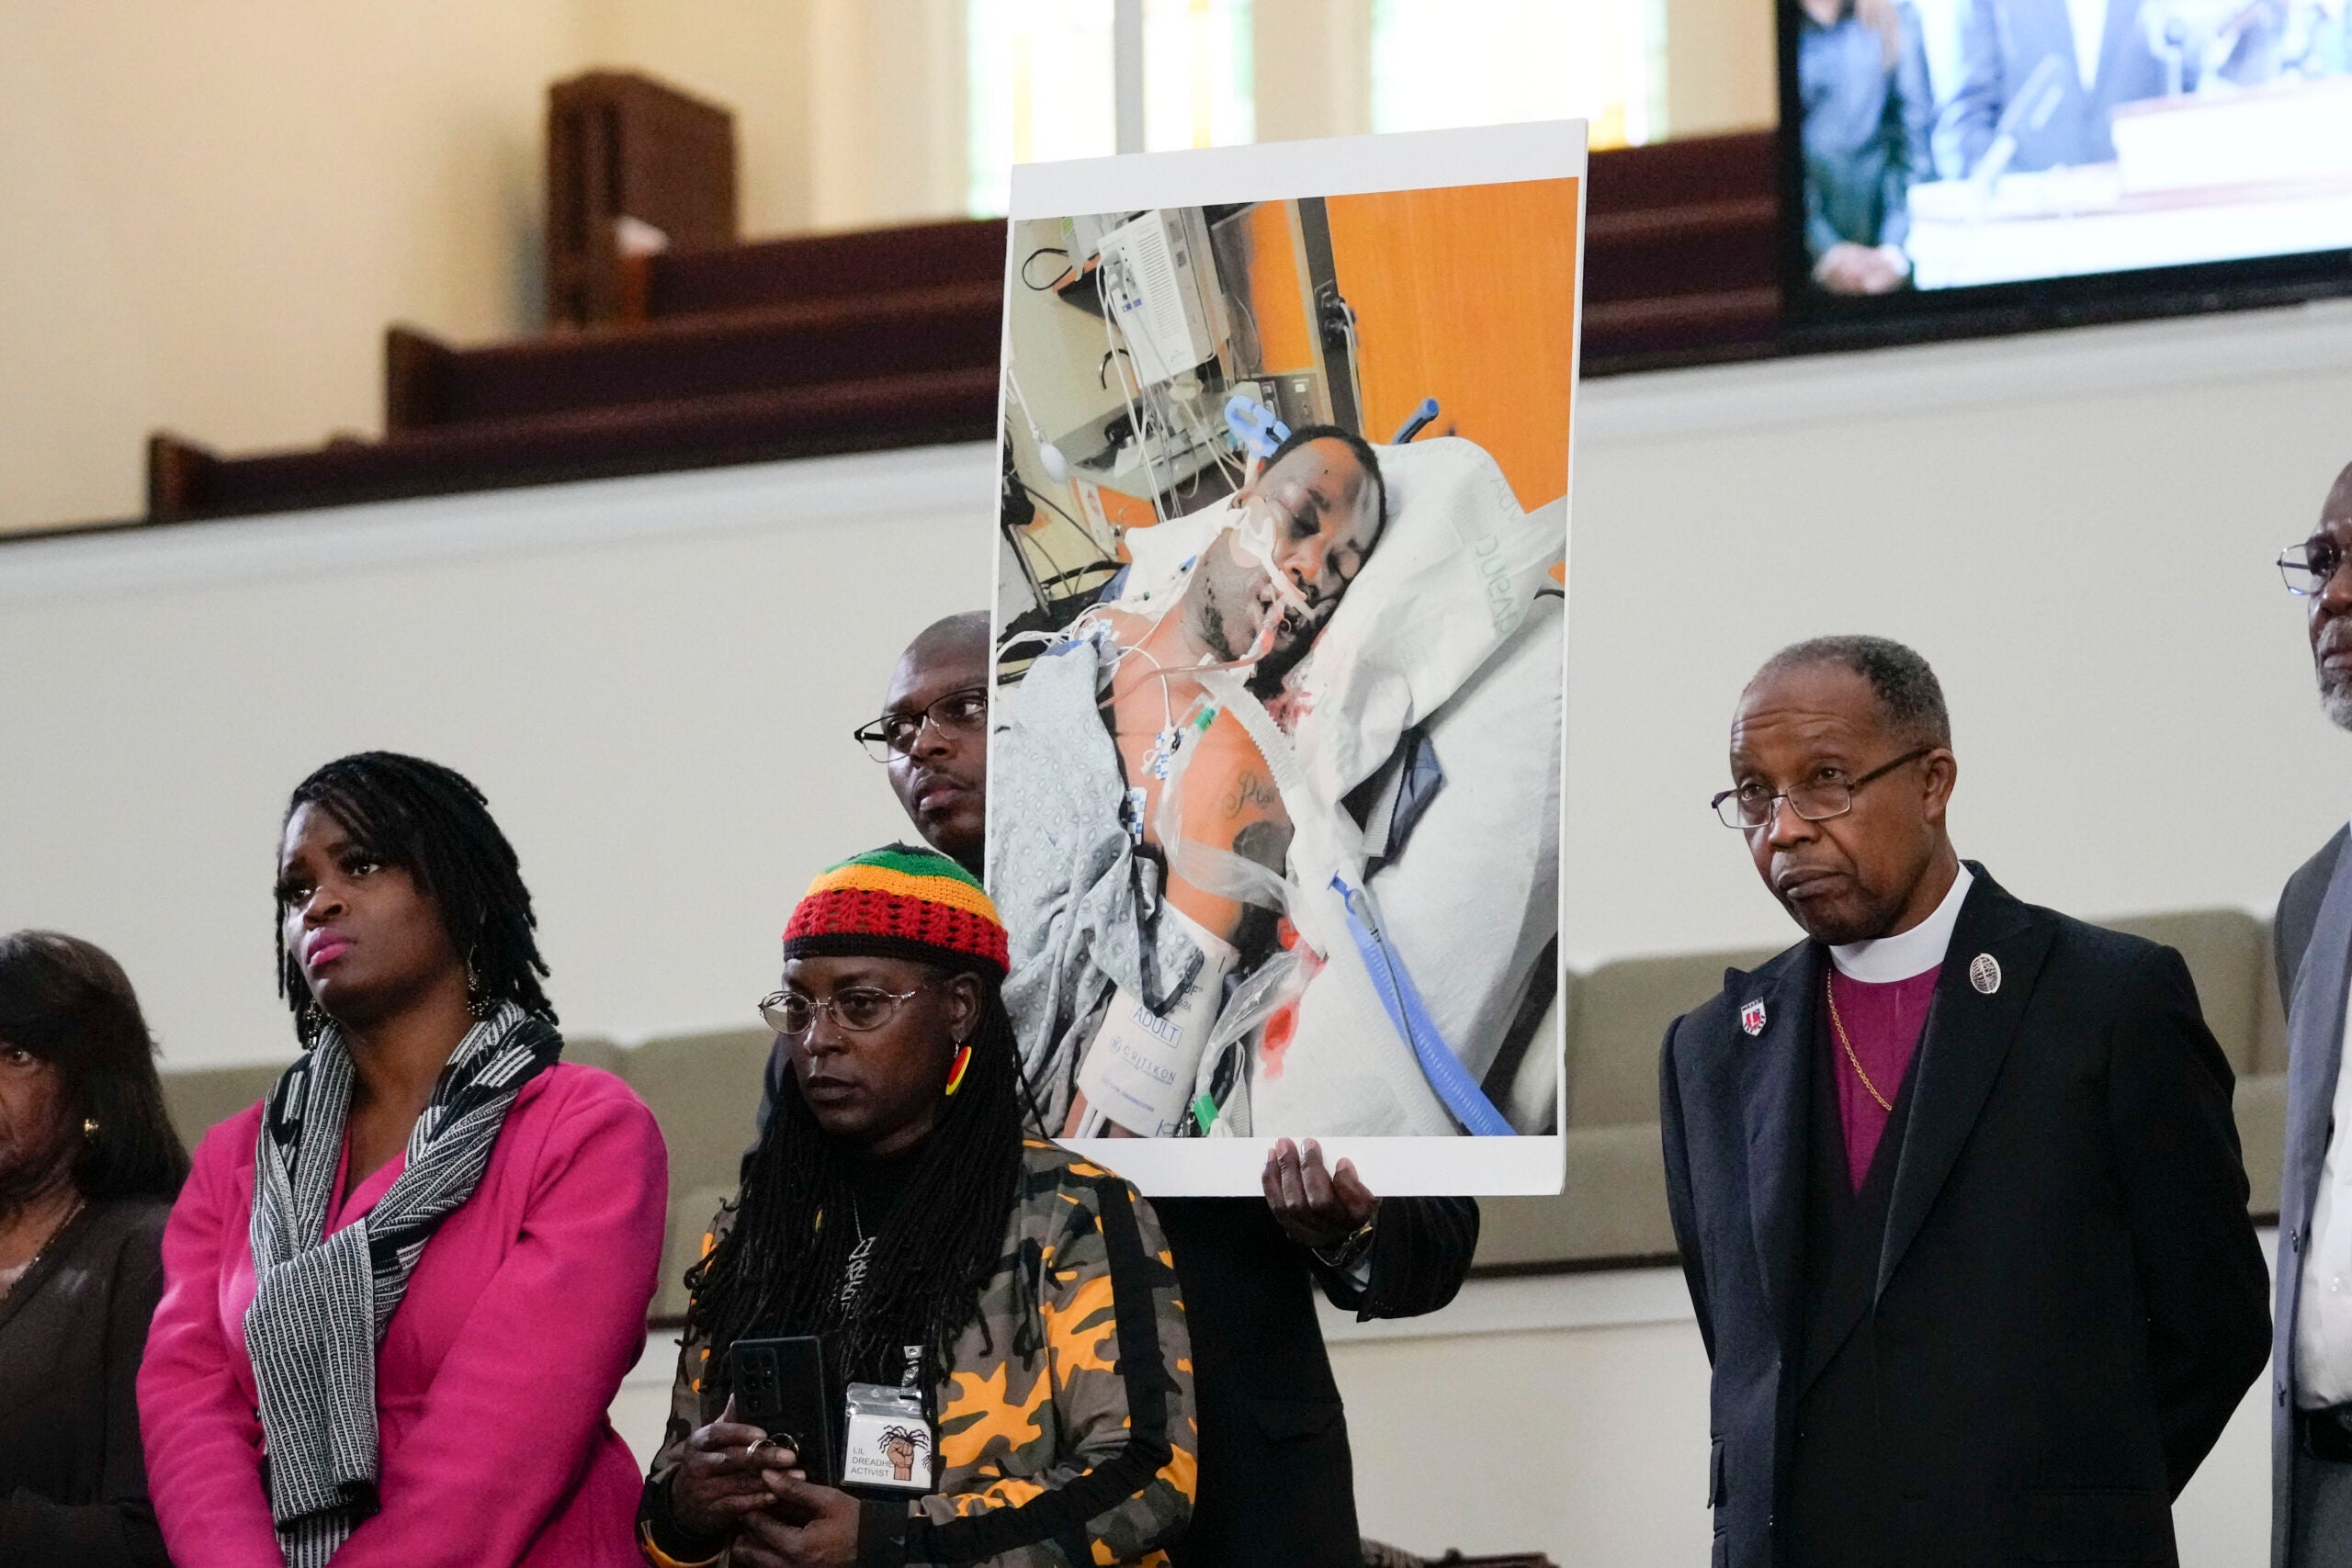 FILE - Family members and supporters hold a photograph of Tyre Nichols at a news conference in Memphis, Tenn., Jan. 23, 2023. The U.S. Attorney’s Office said Wednesday, Jan. 25, 2023 the federal investigation into the death of a Black man who died after a violent arrest by Memphis police “may take some time.” Speaking during a news conference, U.S. Attorney Kevin G. Ritz said his office is working with the Justice Department's Civil Rights Division in Washington as it investigates the case of Tyre Nichols, who died three days after his Jan. 7 arrest. (AP Photo/Gerald Herbert, file)